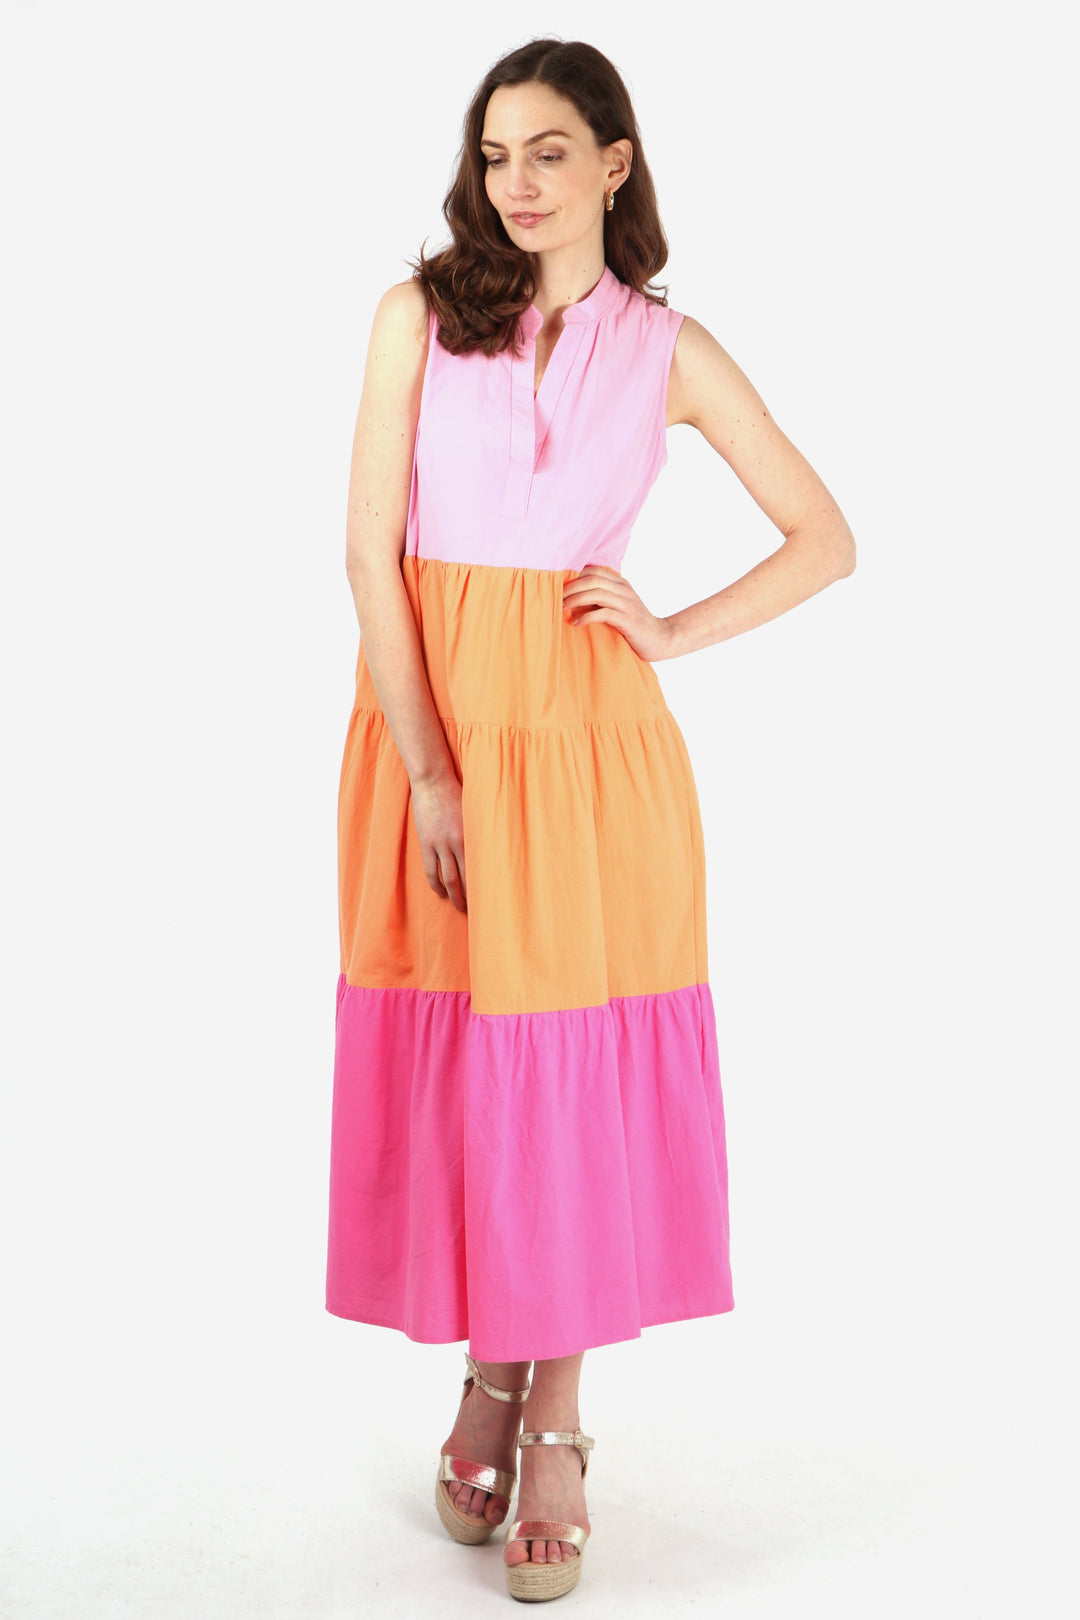 model wearing a midaxi length sleeveless cotton dress with a grandad collar in a pattern of three bold colour block stripes, baby pink bodice, orange mid section and hot pink bottom tier